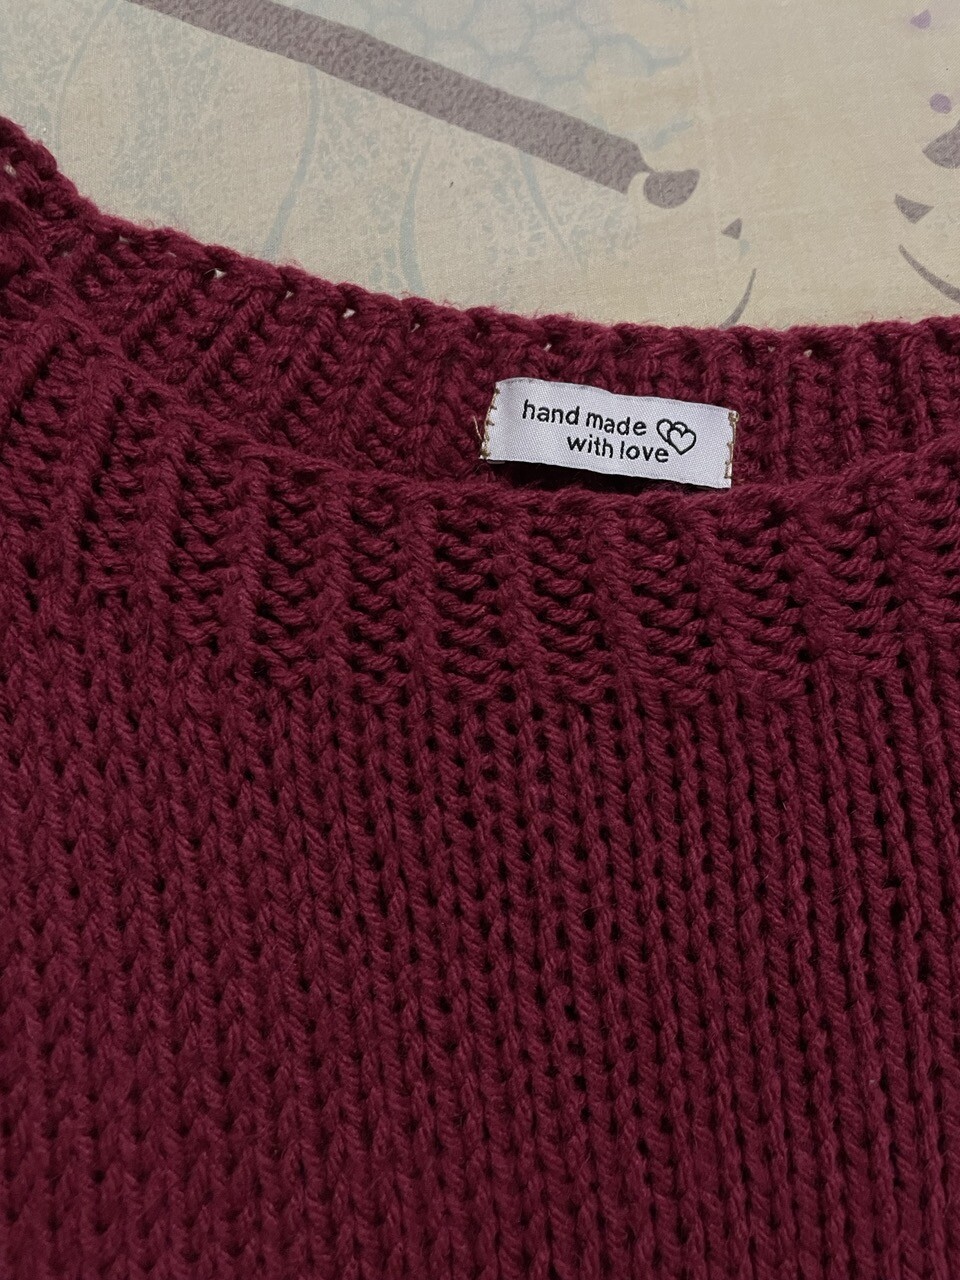 Clothing label with the words handmade with love sewn on the collar of the sweater